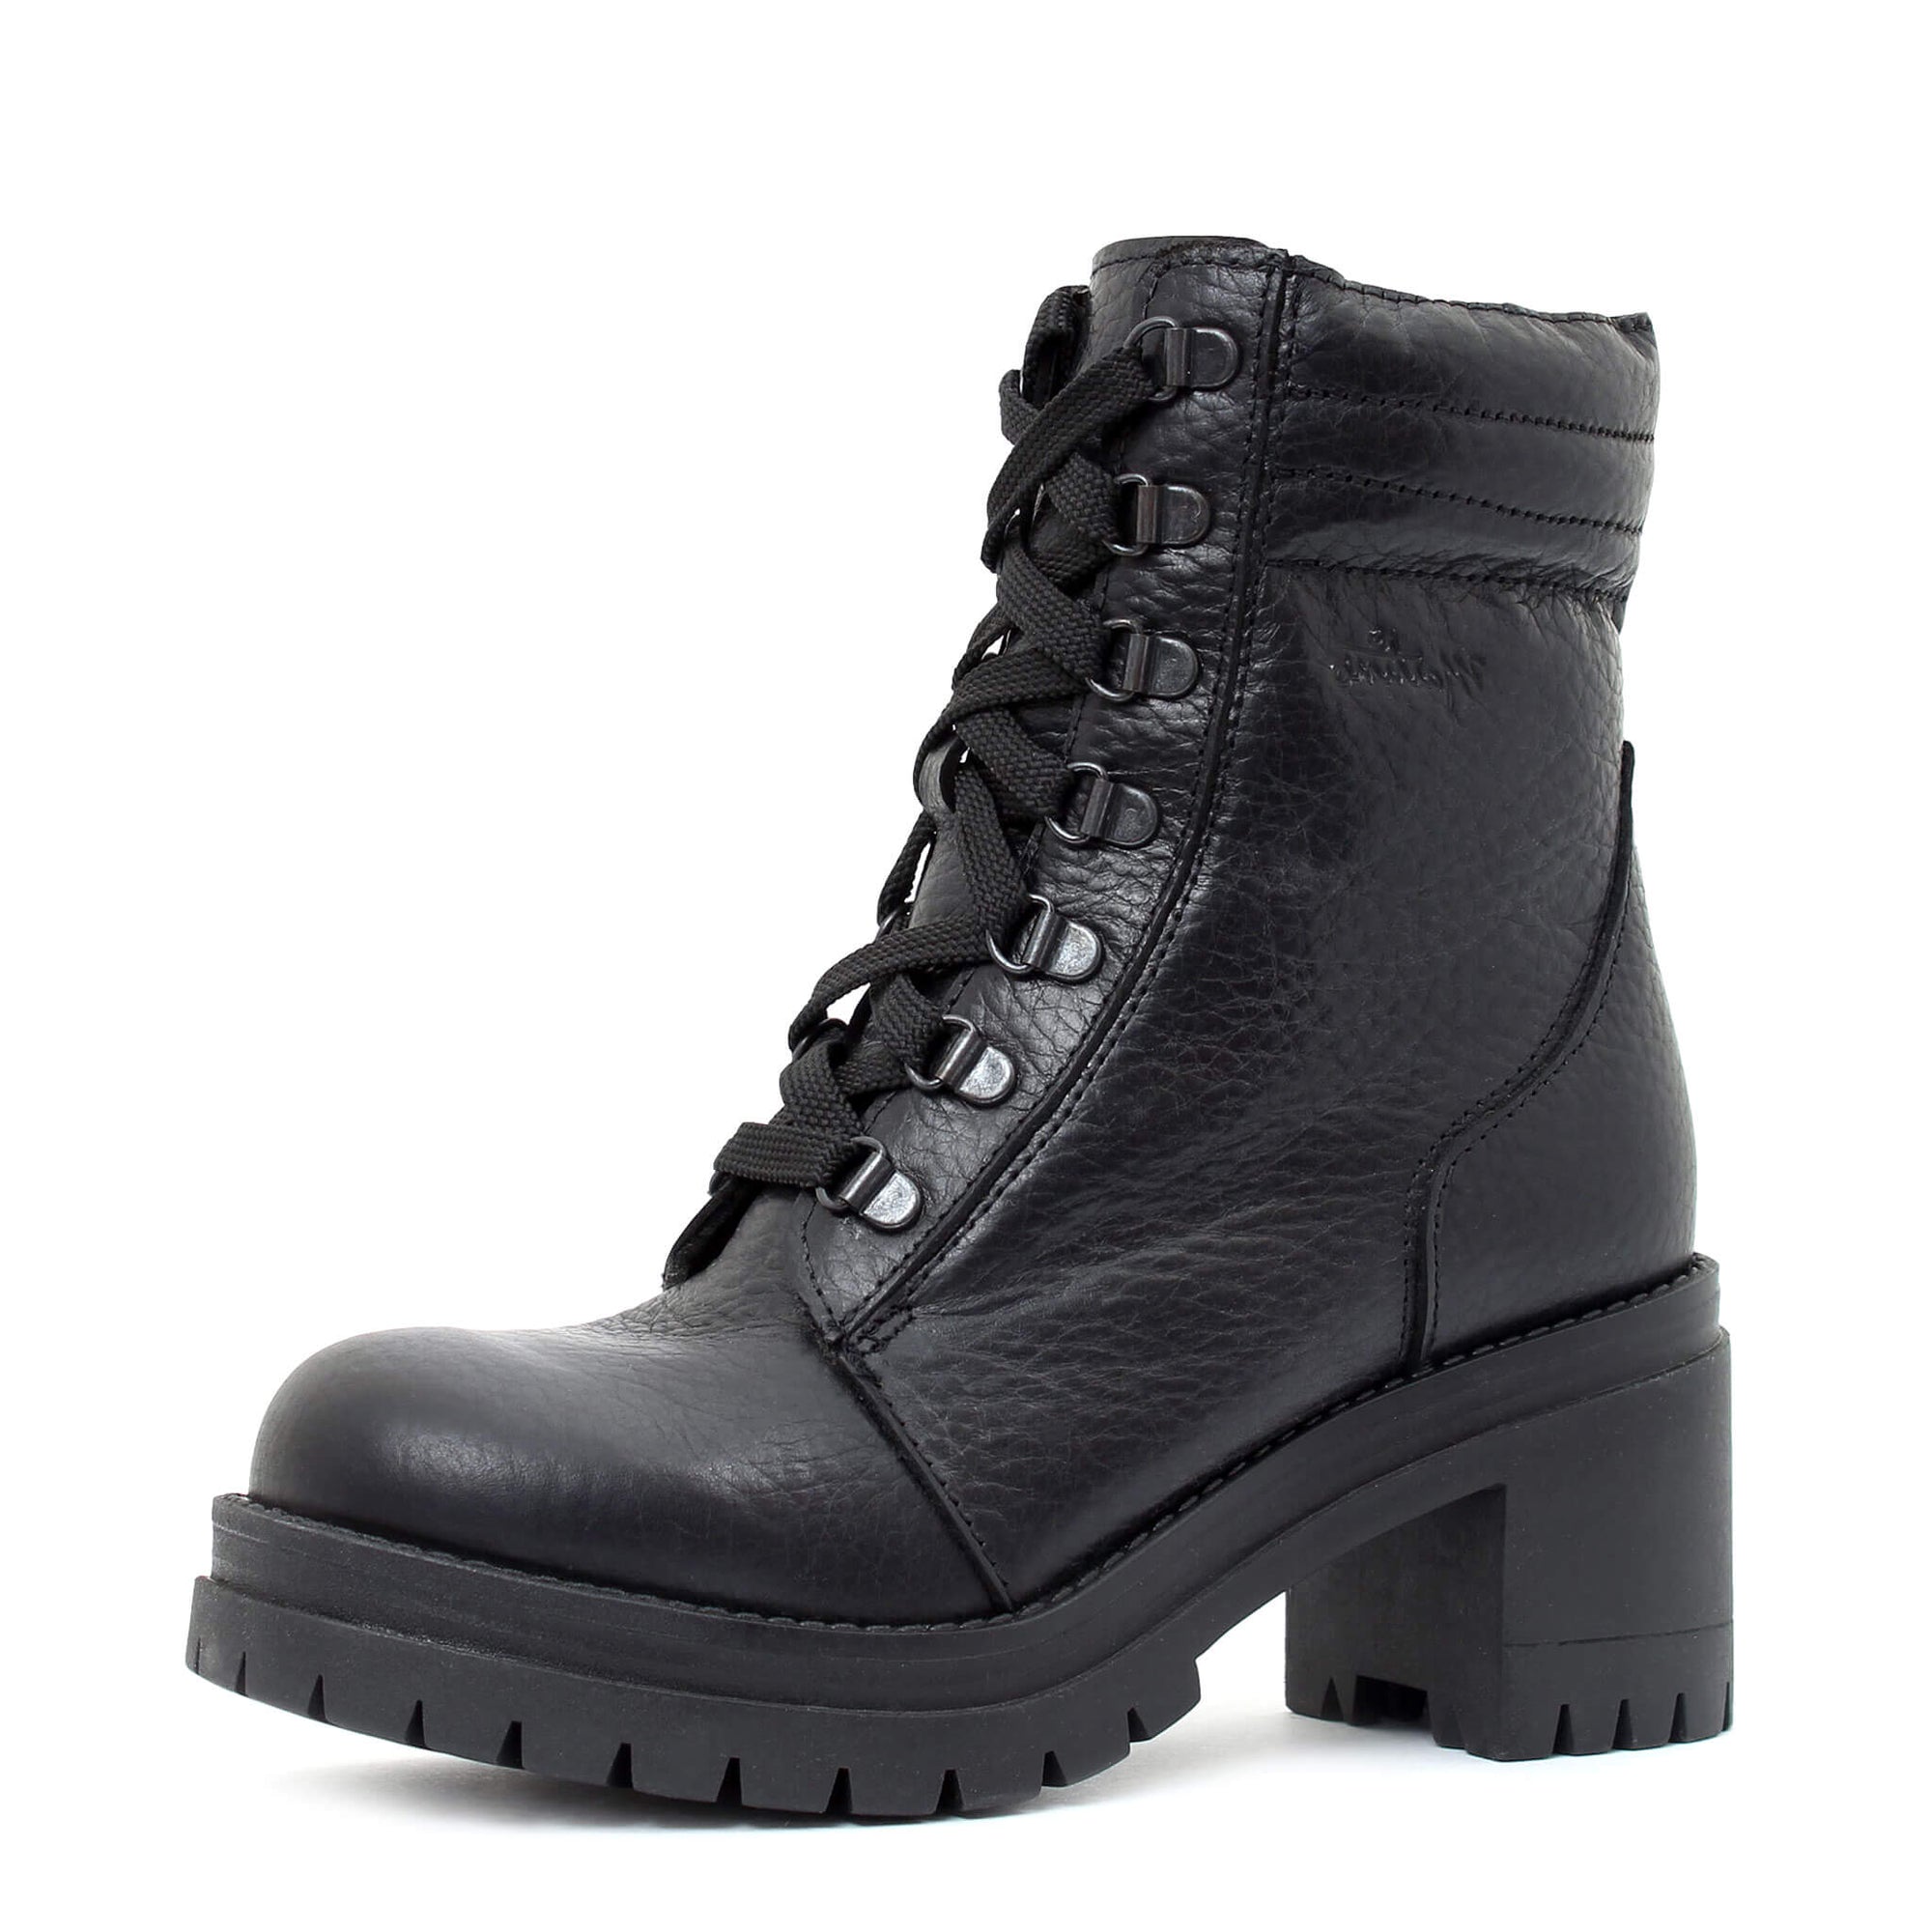 Phoebe fall boot for women 